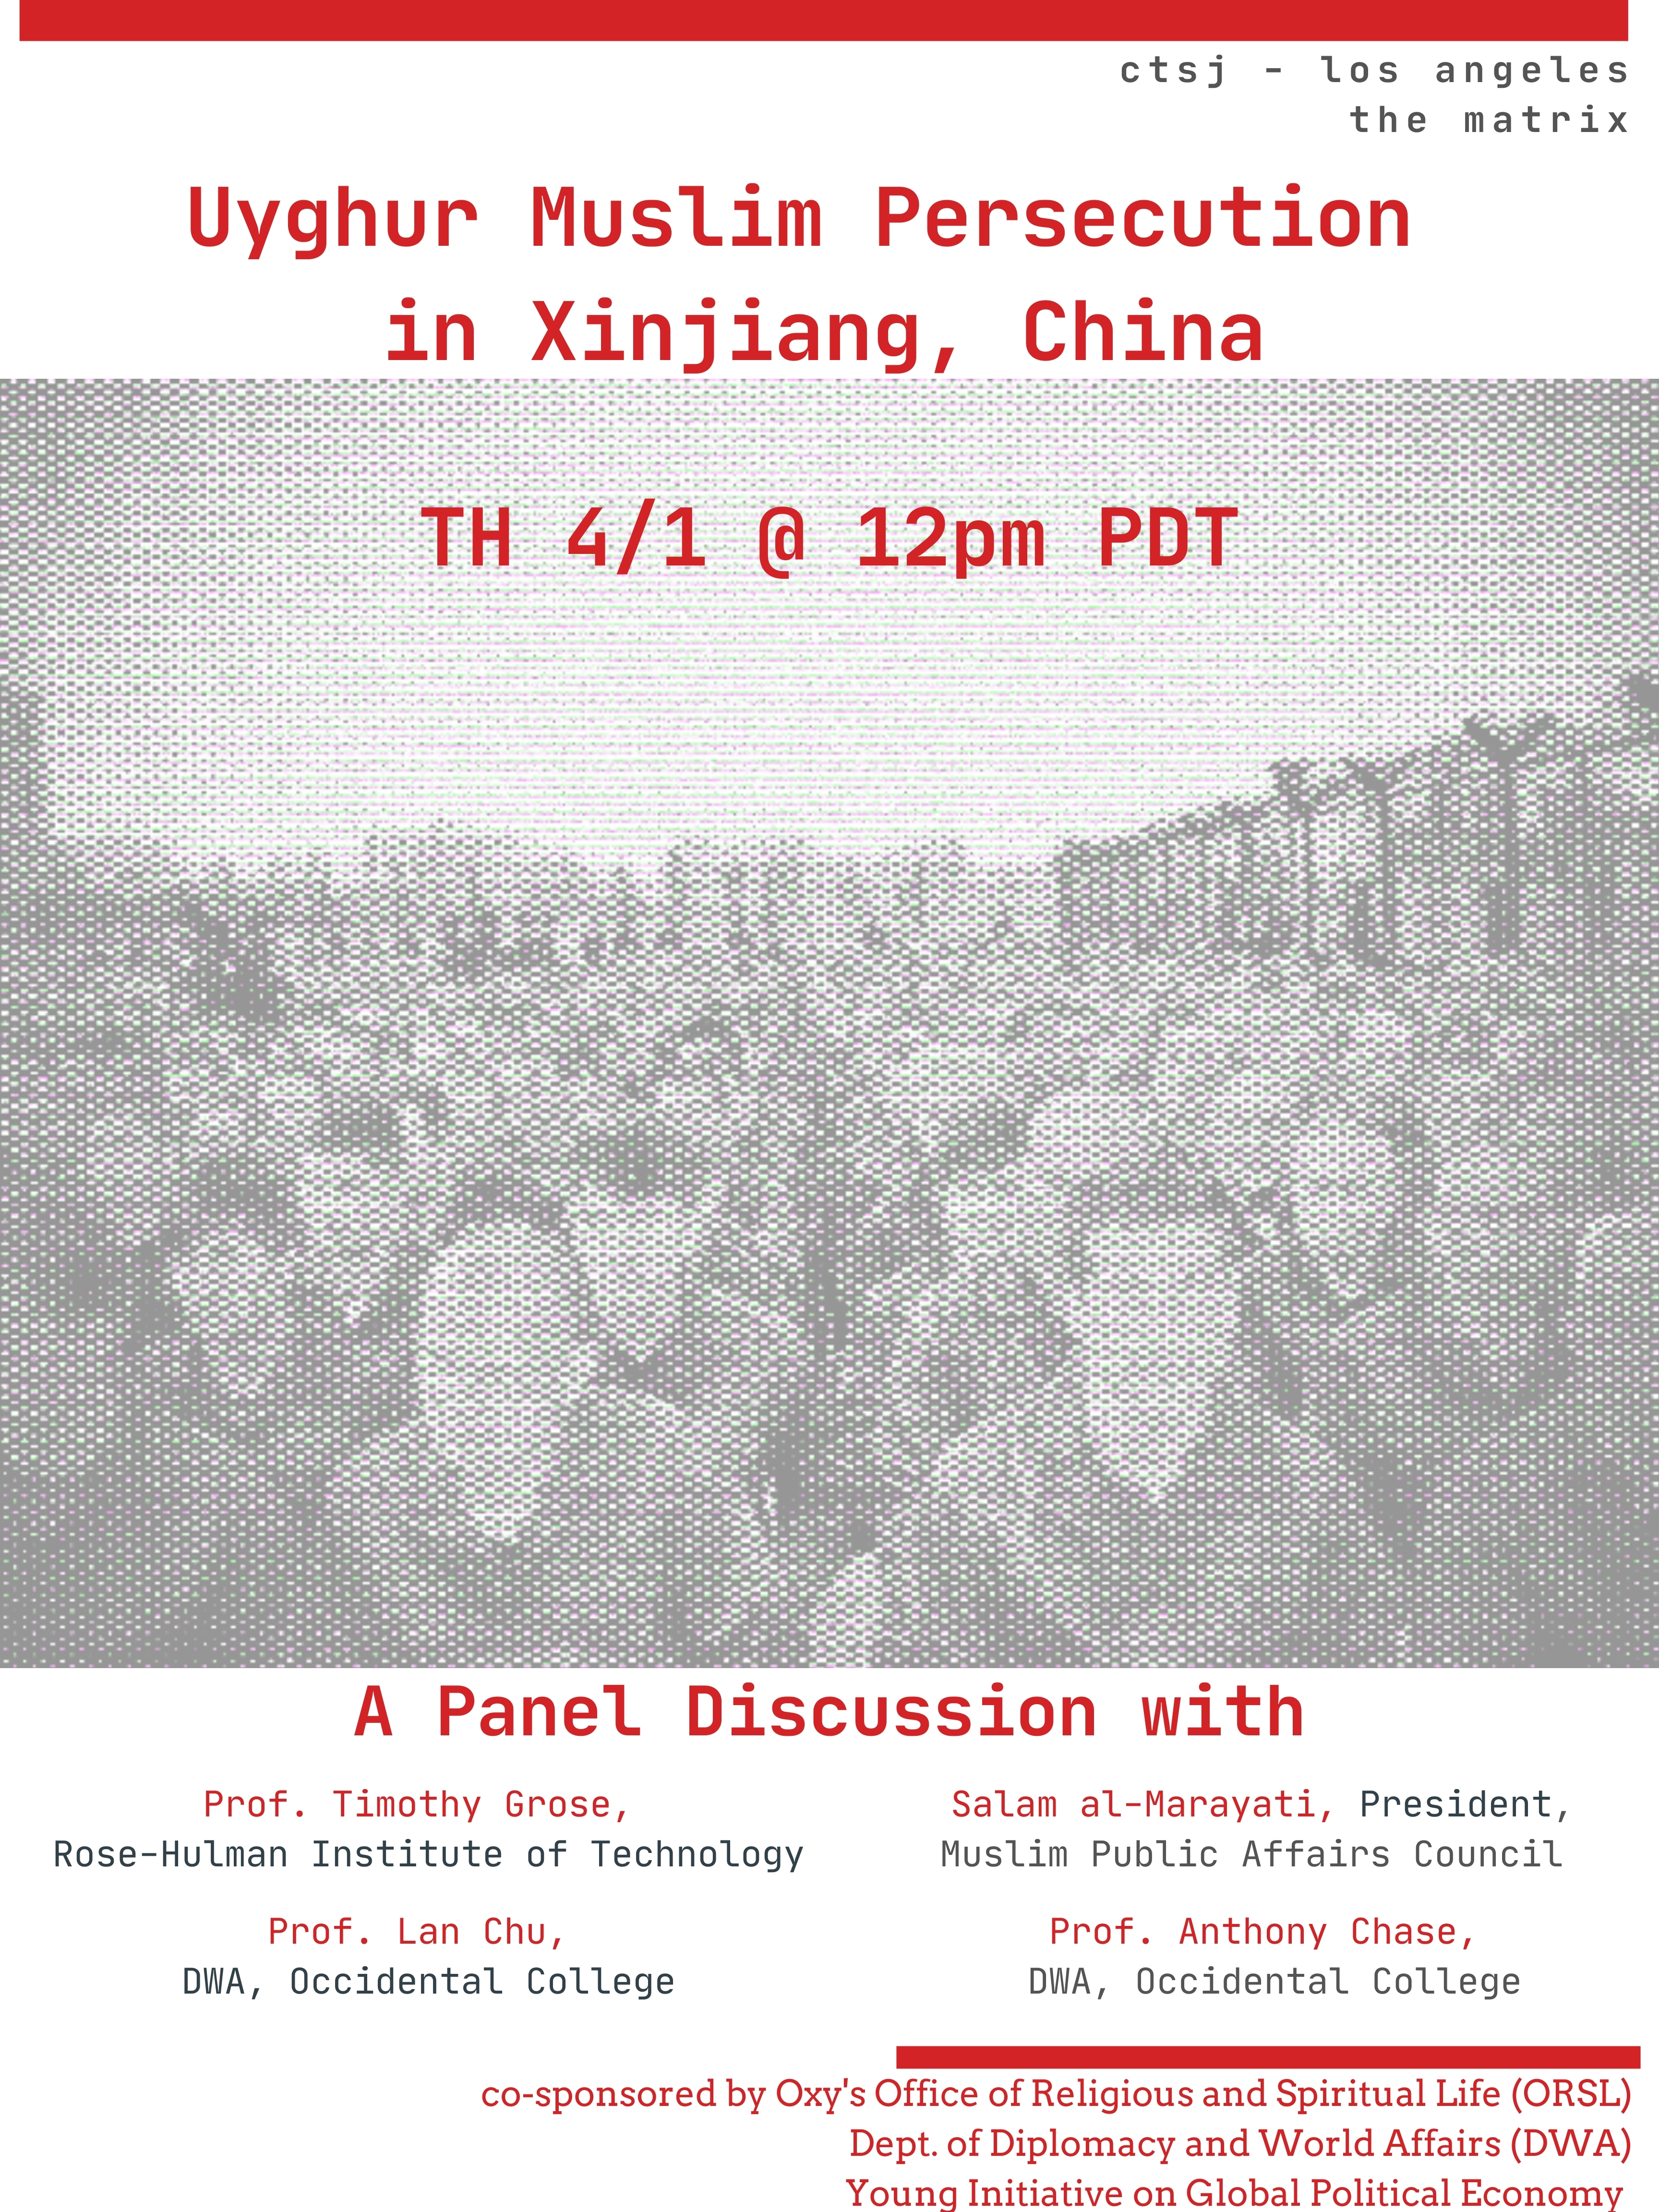 Poster for Panel on Uyghur Muslim Persecution